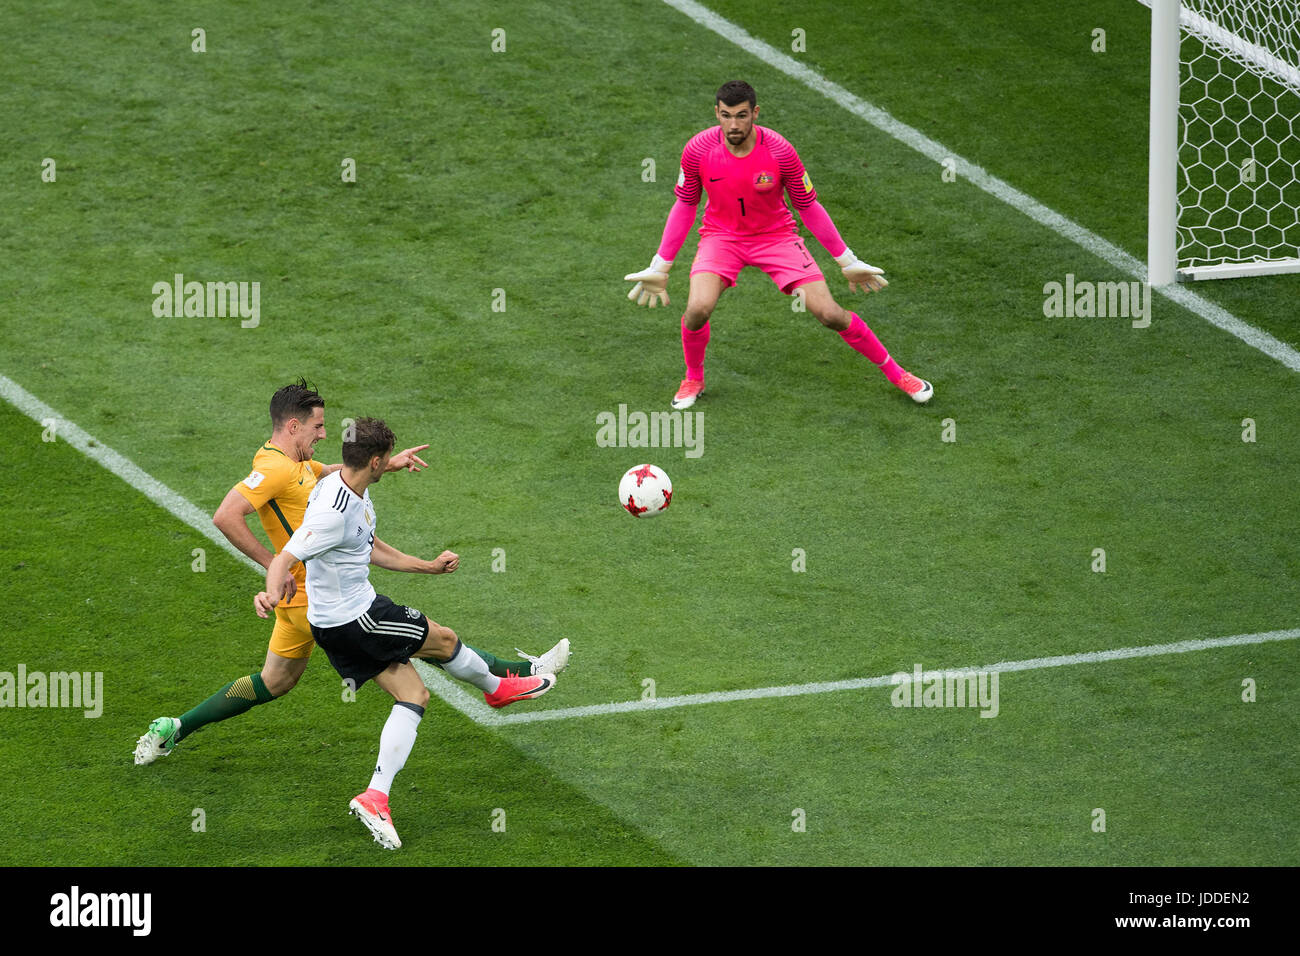 Sochi, Russia. 19th June, 2017. Germany's Leon Goretzka (in white) beats Australian keeper Maty Ryan (in pink) and defender Milos Degenek (C) to give his side a 3:1 lead during the Confederations Cup group stages Group B match between Australia and Germany in the Fisht Stadium in Sochi, Russia, 19 June 2017. Germany won 3:2. Photo: Marius Becker/dpa/Alamy Live News Stock Photo